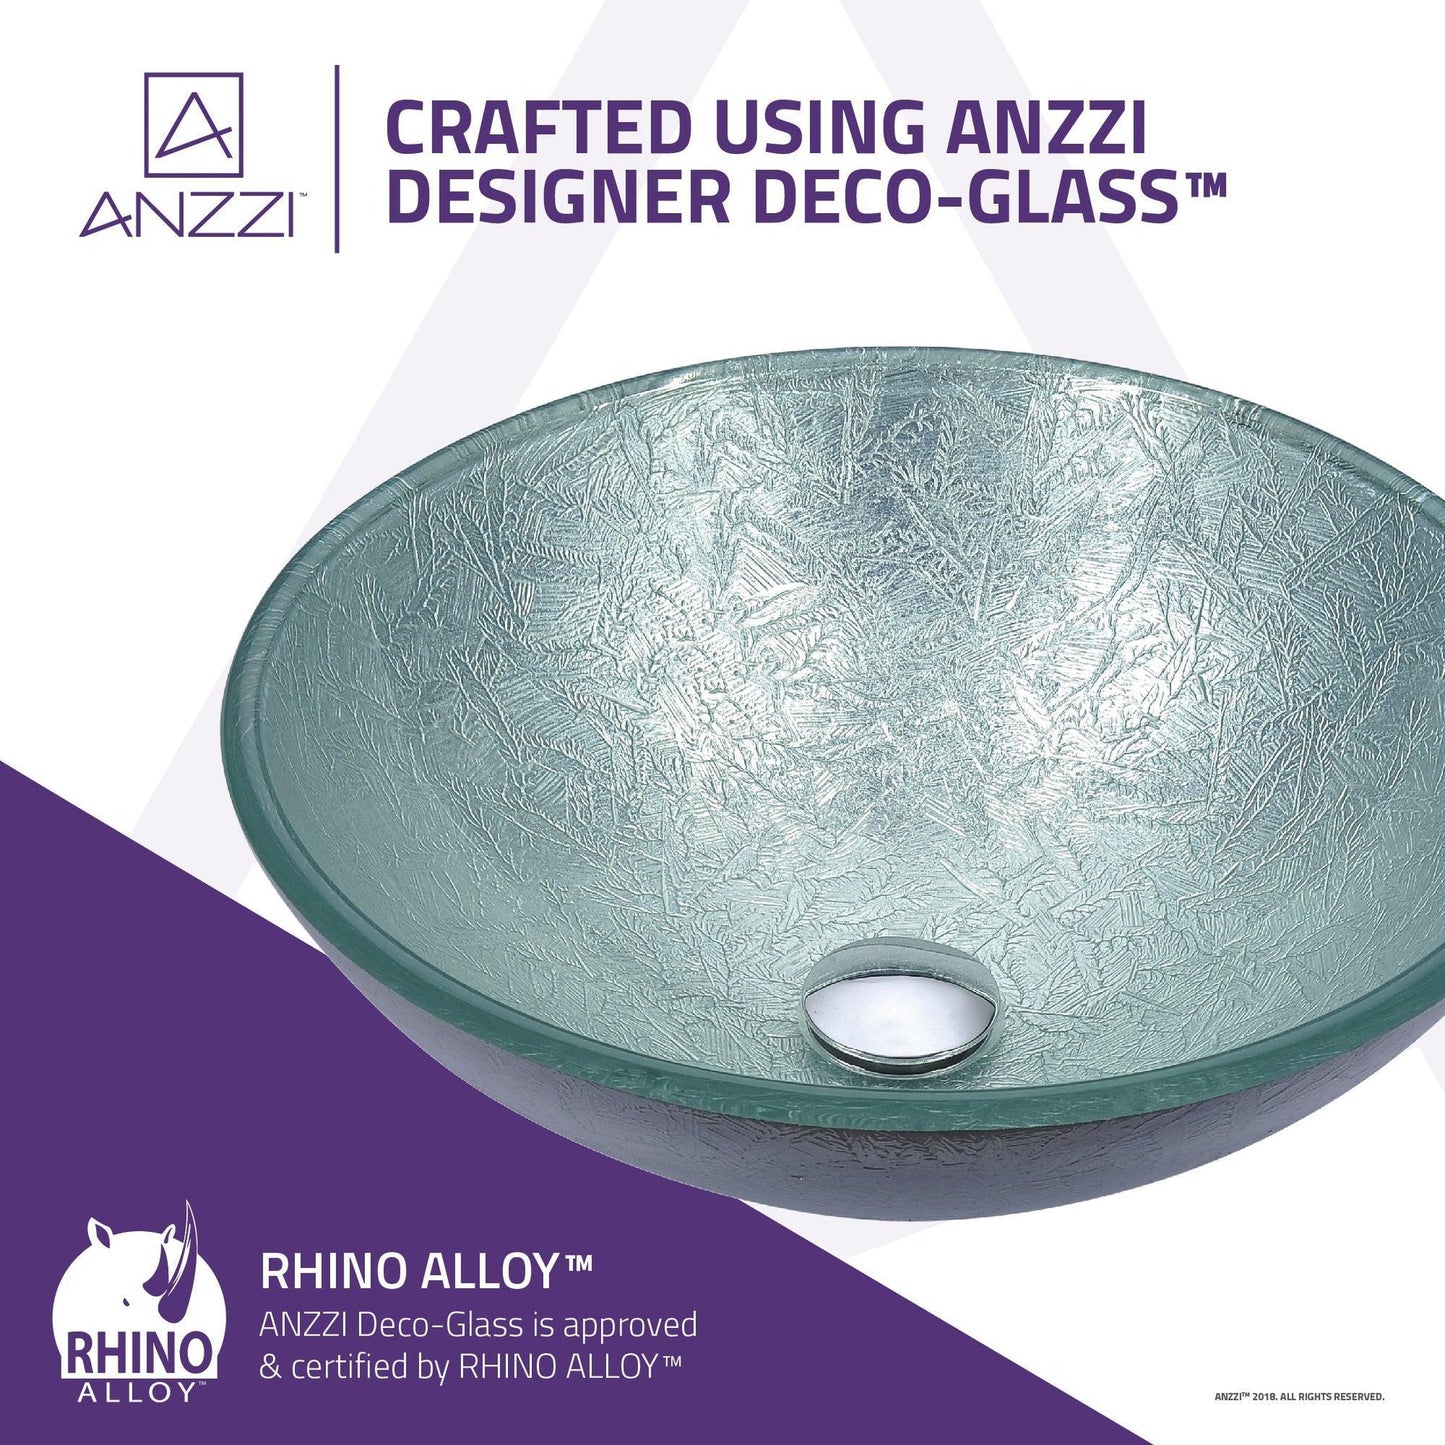 ANZZI Posh Series 17" x 17" Round Glacial Silver Deco-Glass Vessel Sink With Polished Chrome Pop-Up Drain